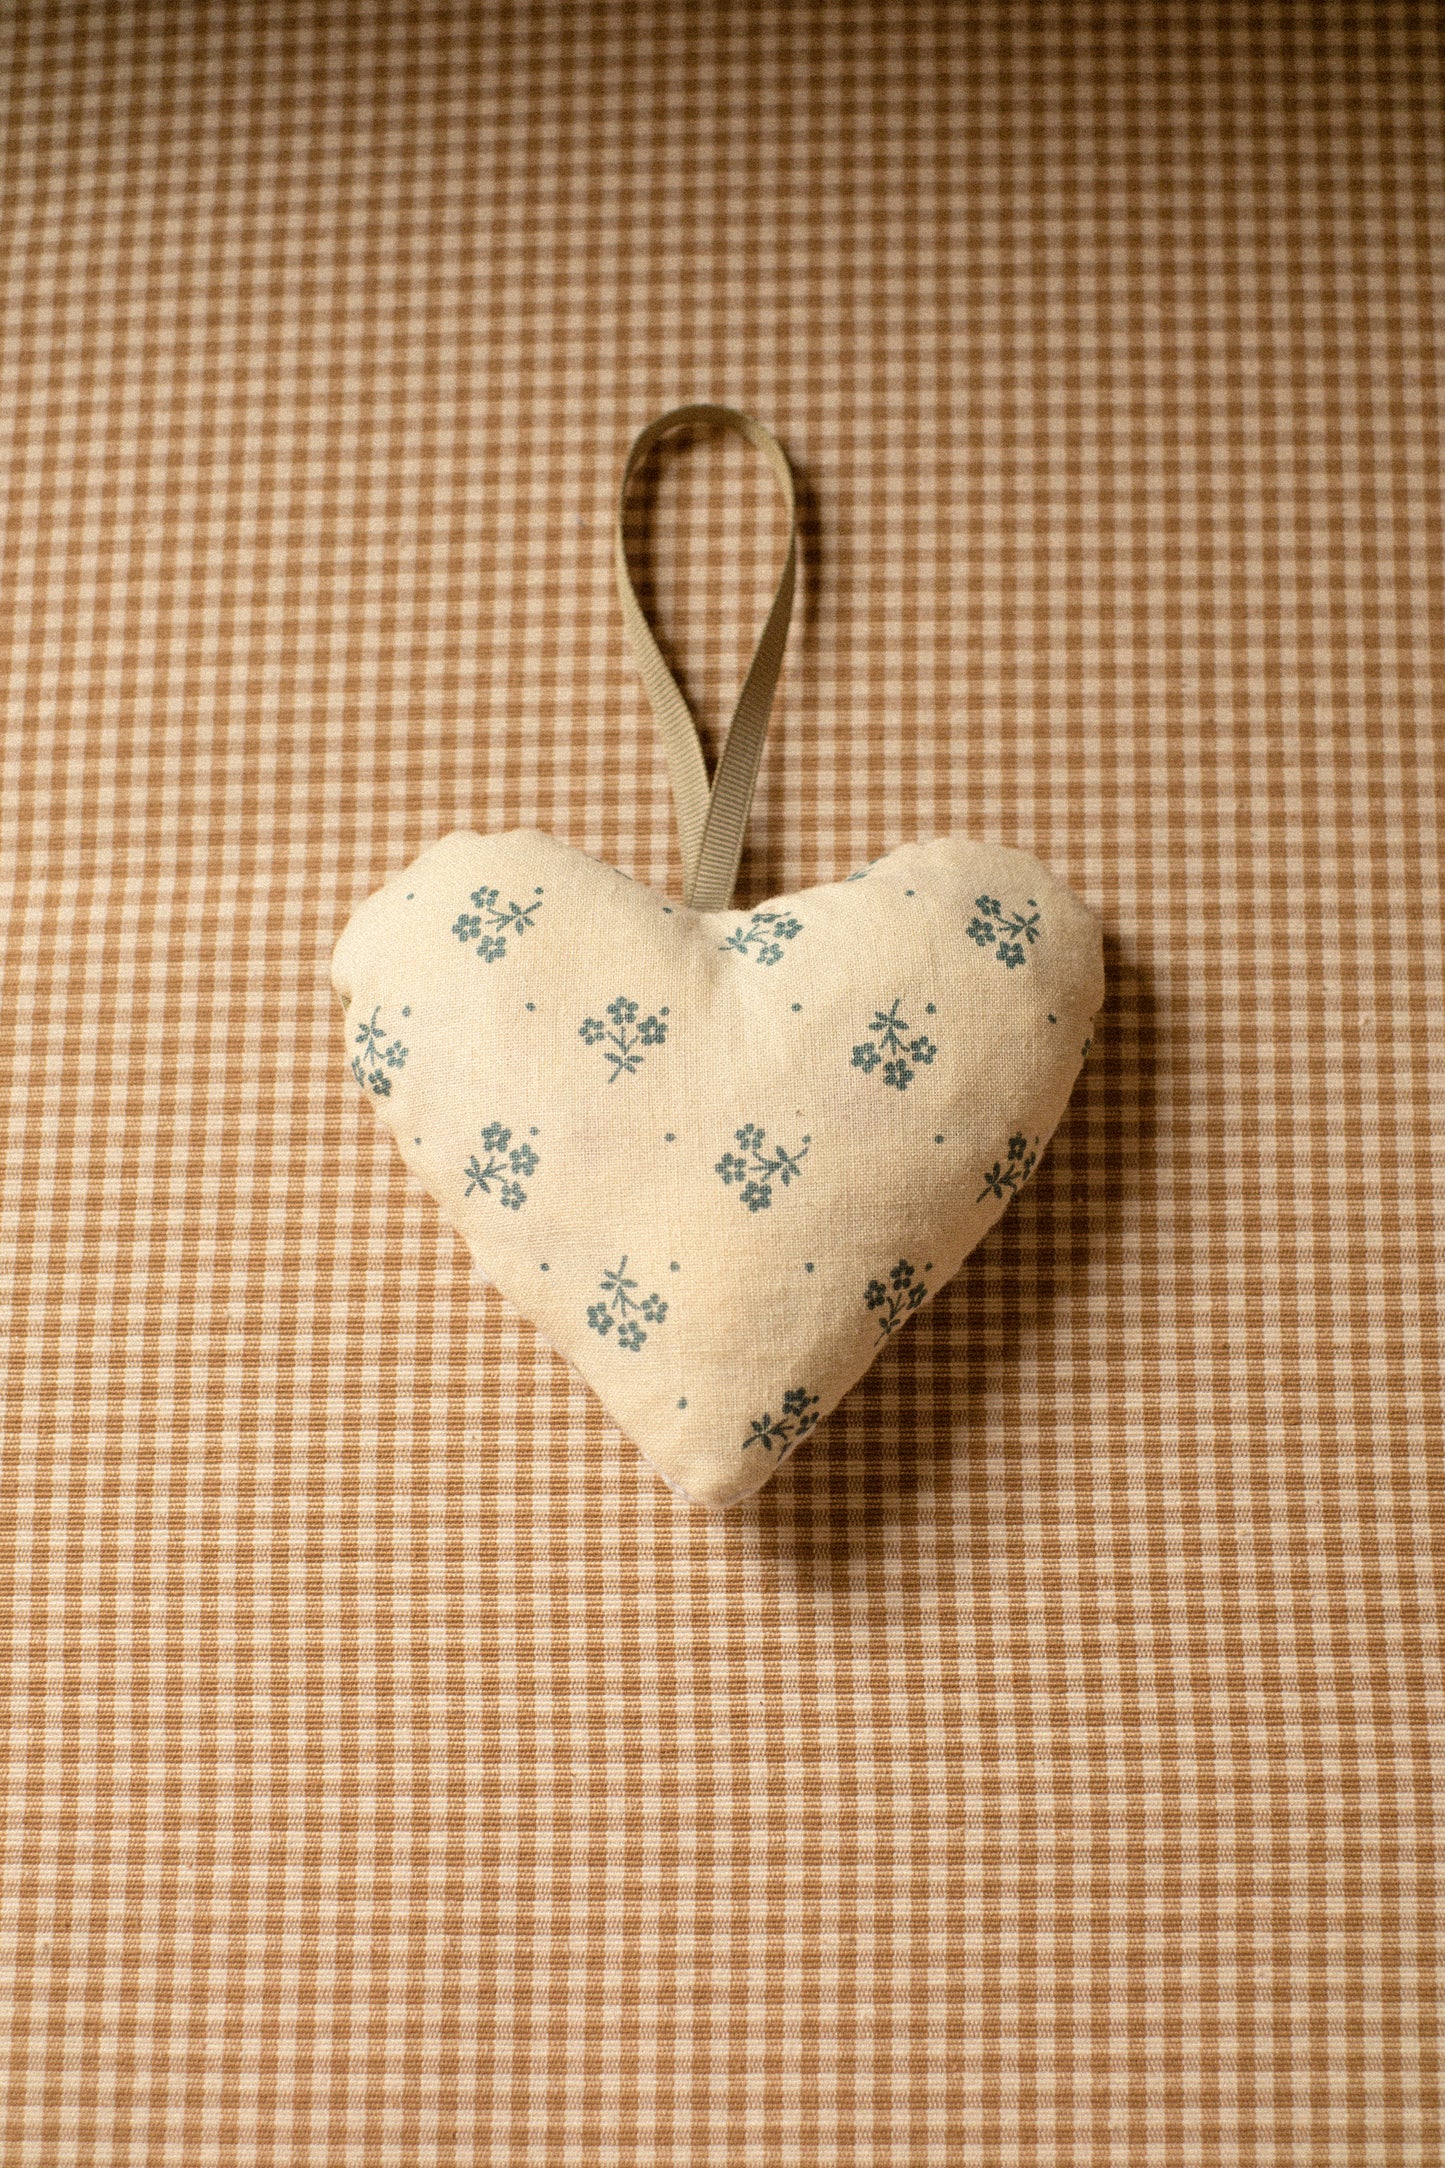 Handmade quilted heart shaped ornaments ♡